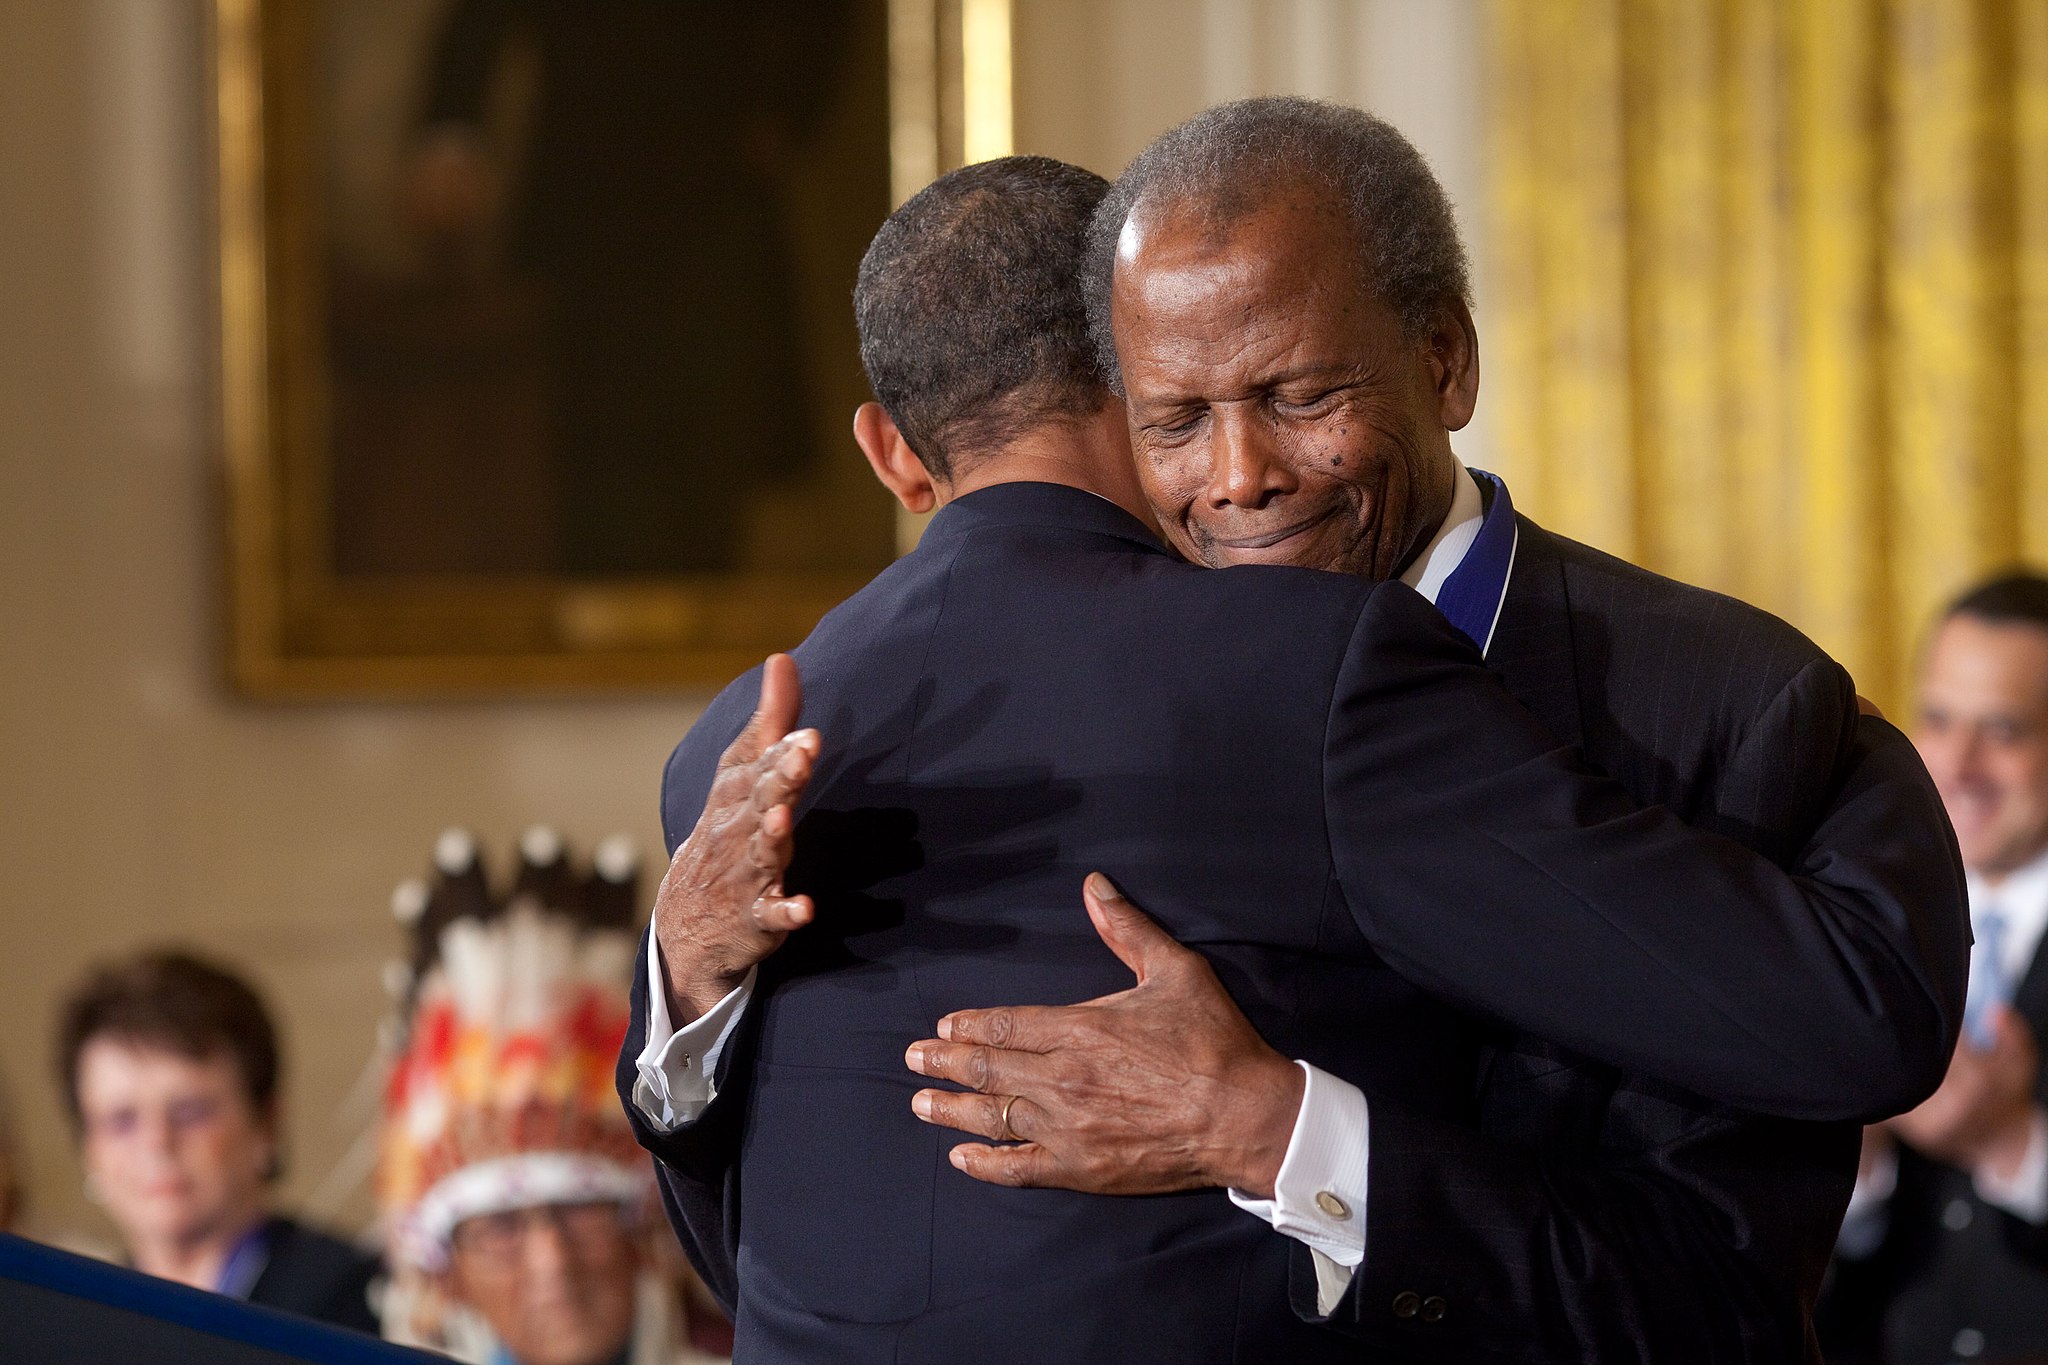 News Tip: Sidney Poitier ‘Carried a Unique Burden of Representation,’ Expert Says